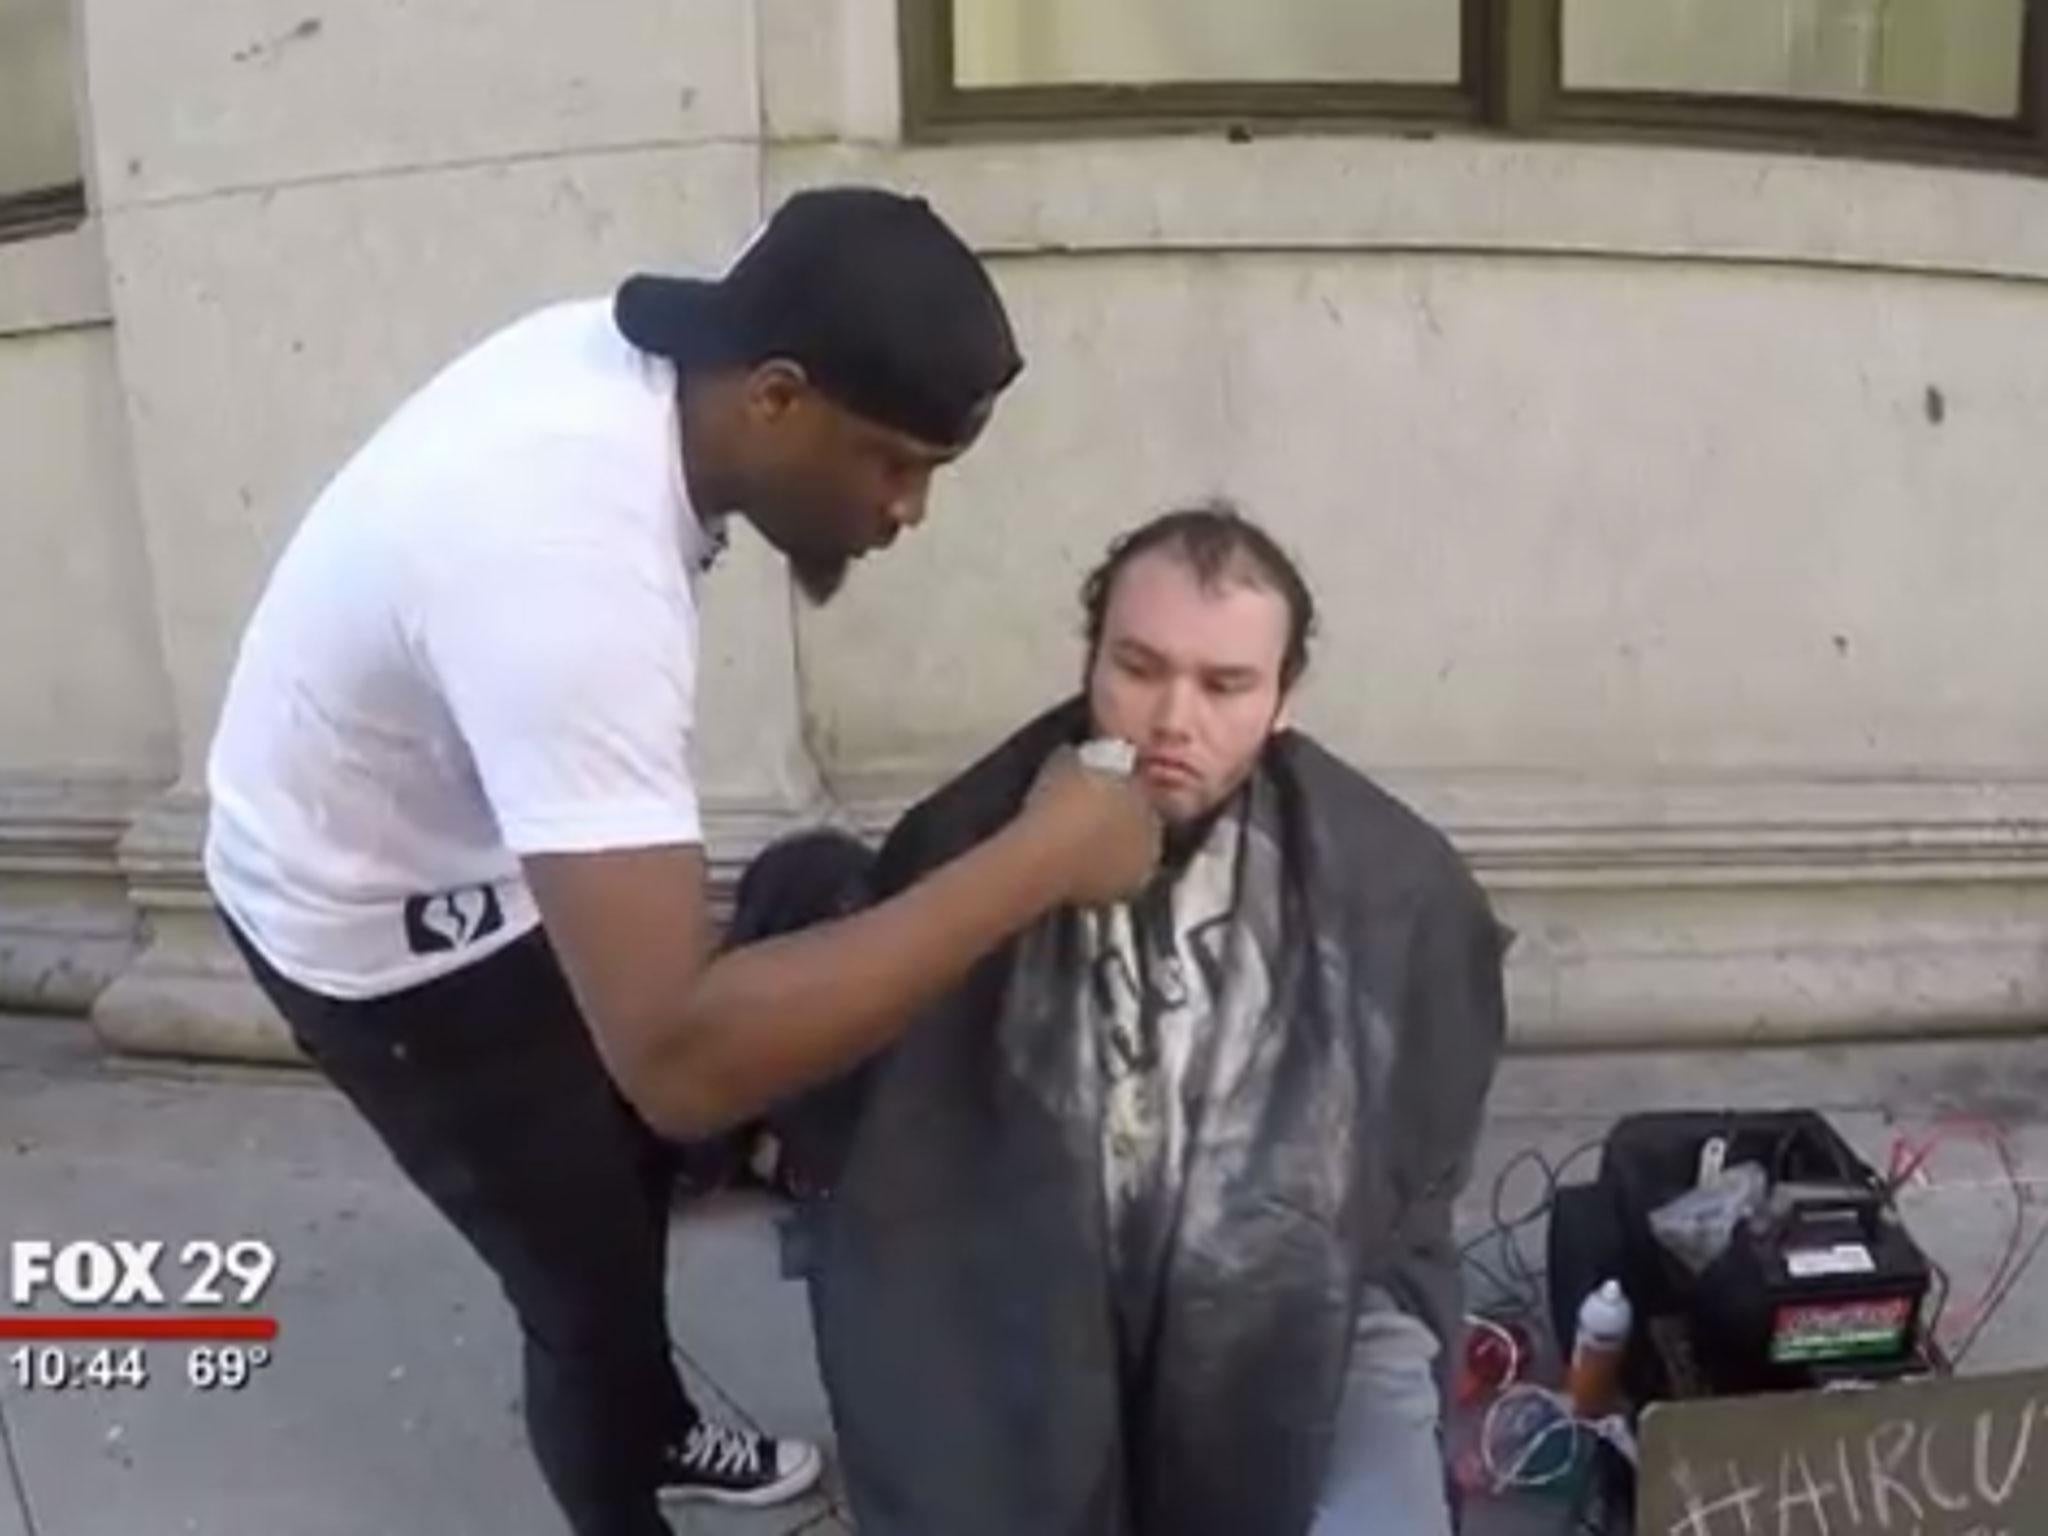 Brennon Jones had been giving free hair cuts and shaves to people living on the streets of Philadelphia for the last year